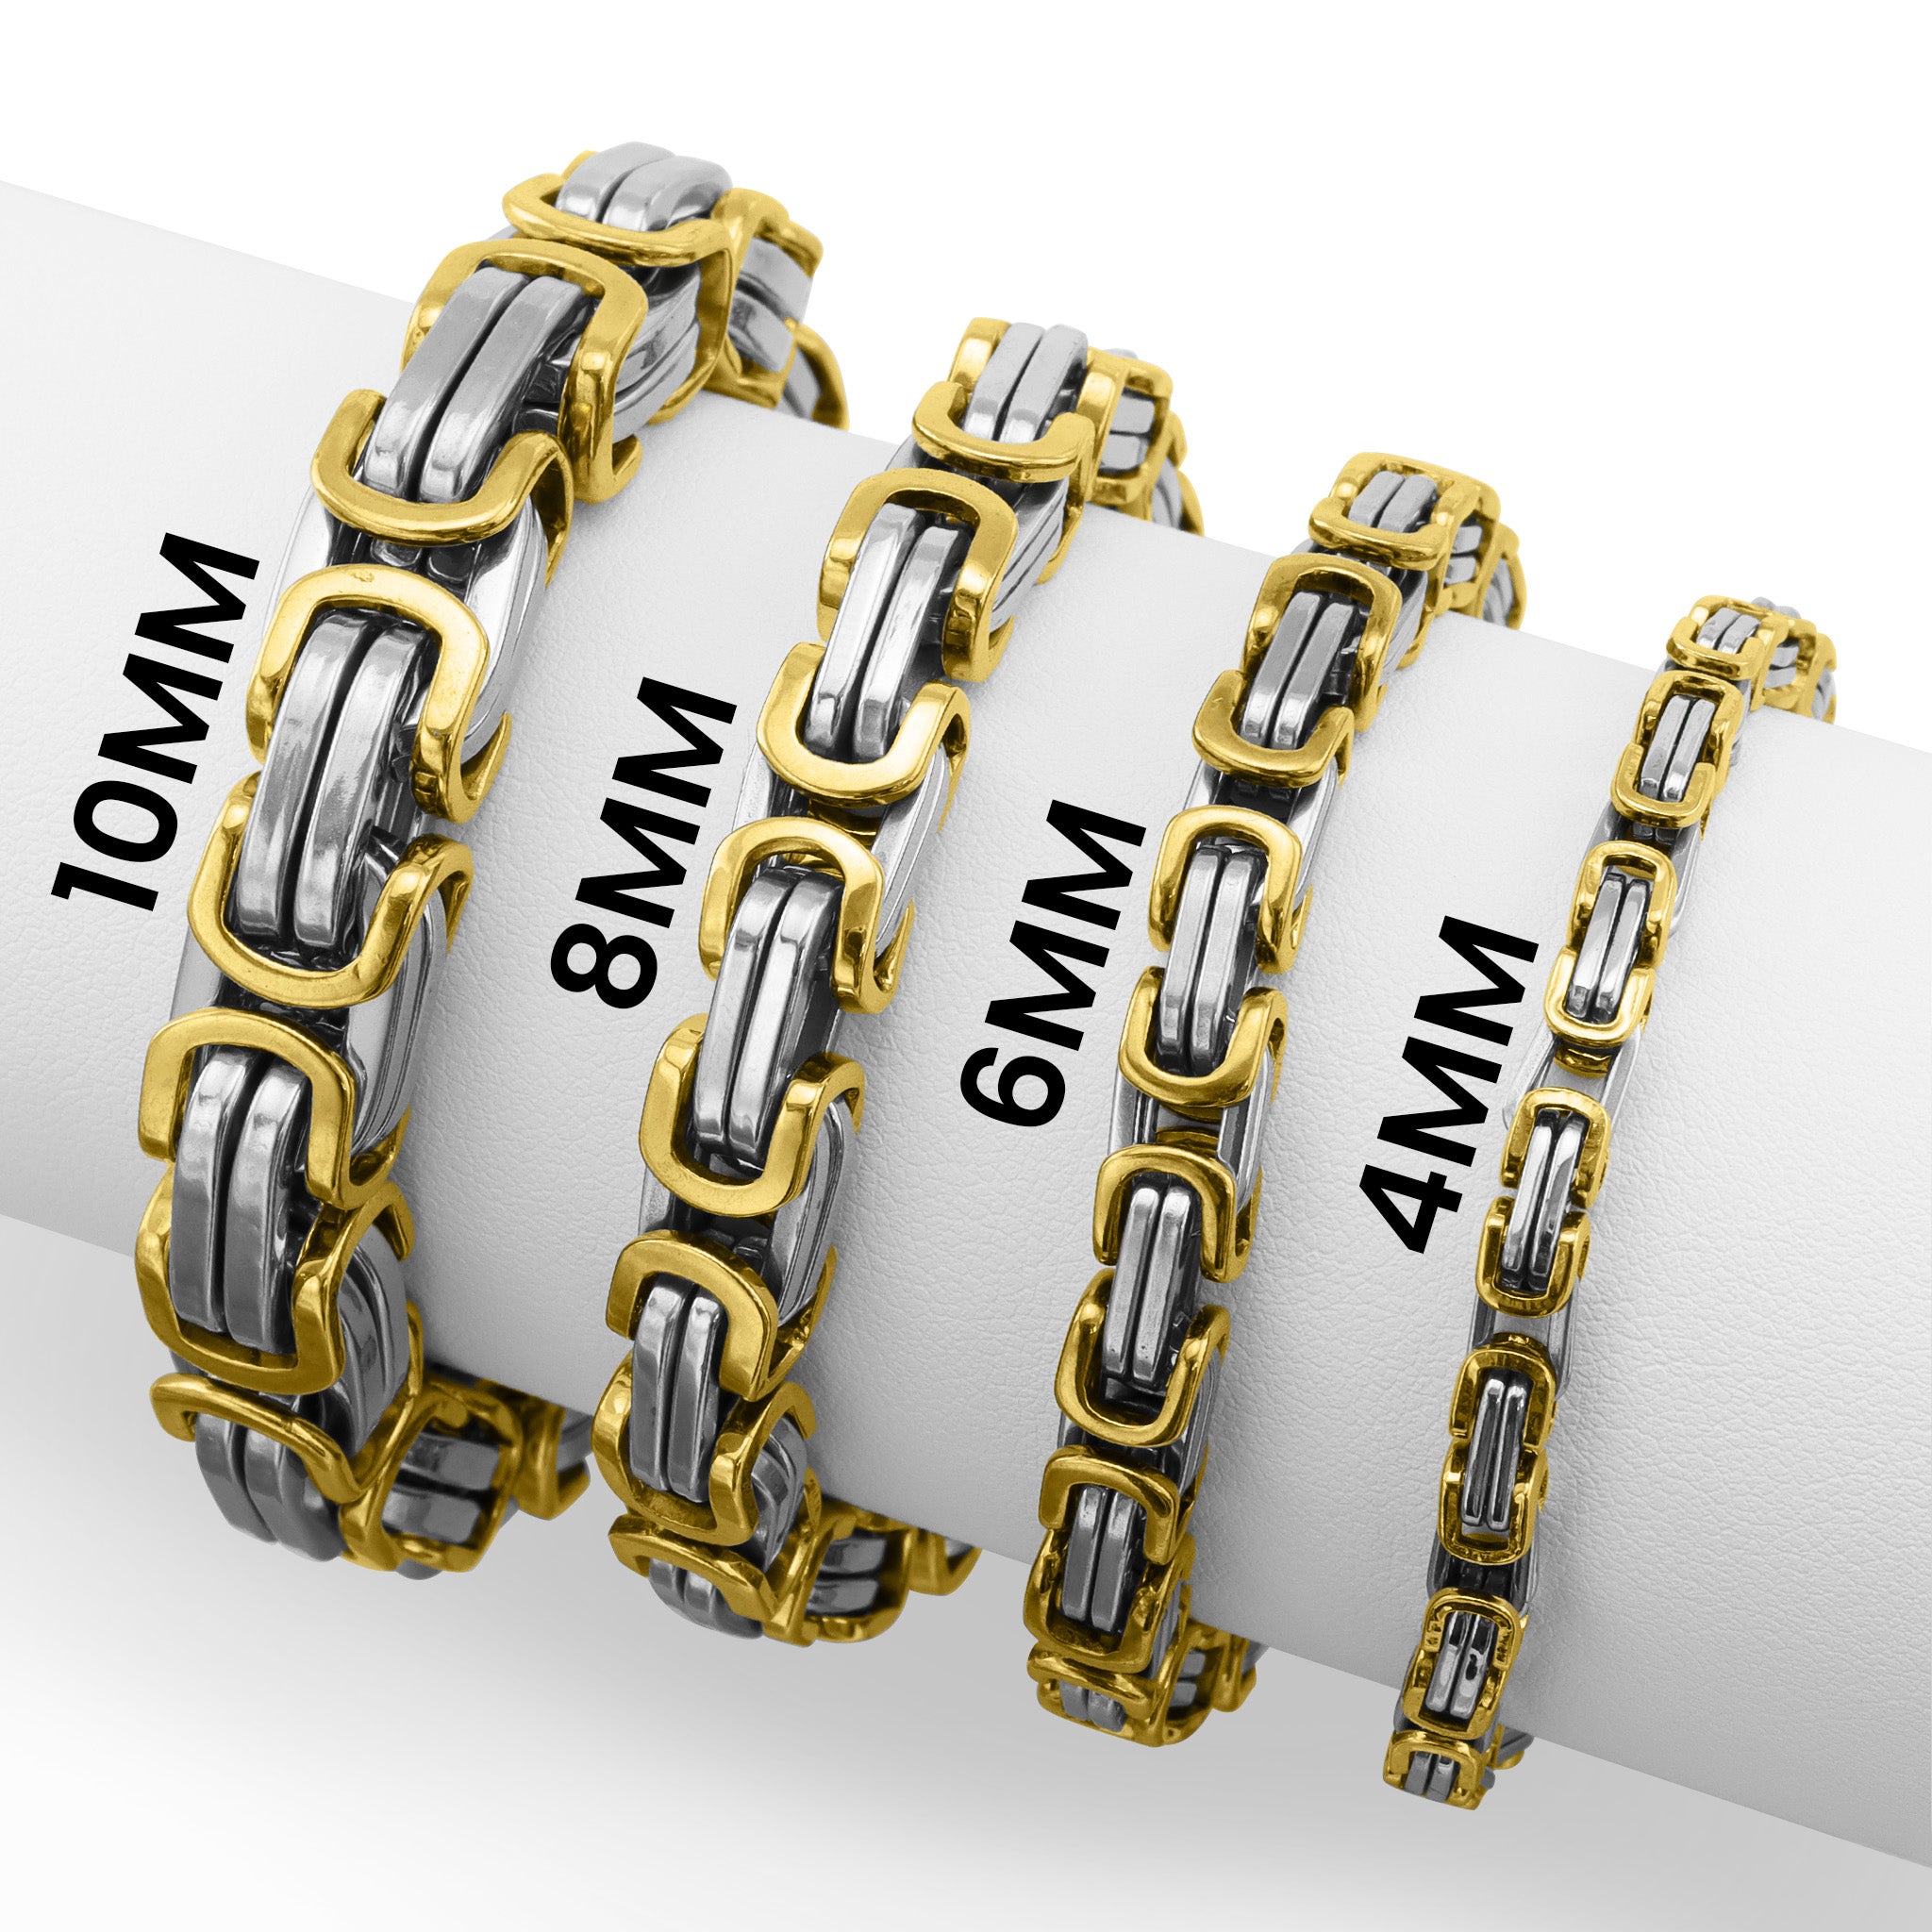 4mm Gold-Tone Stainless Steel Curb Chain Bracelet